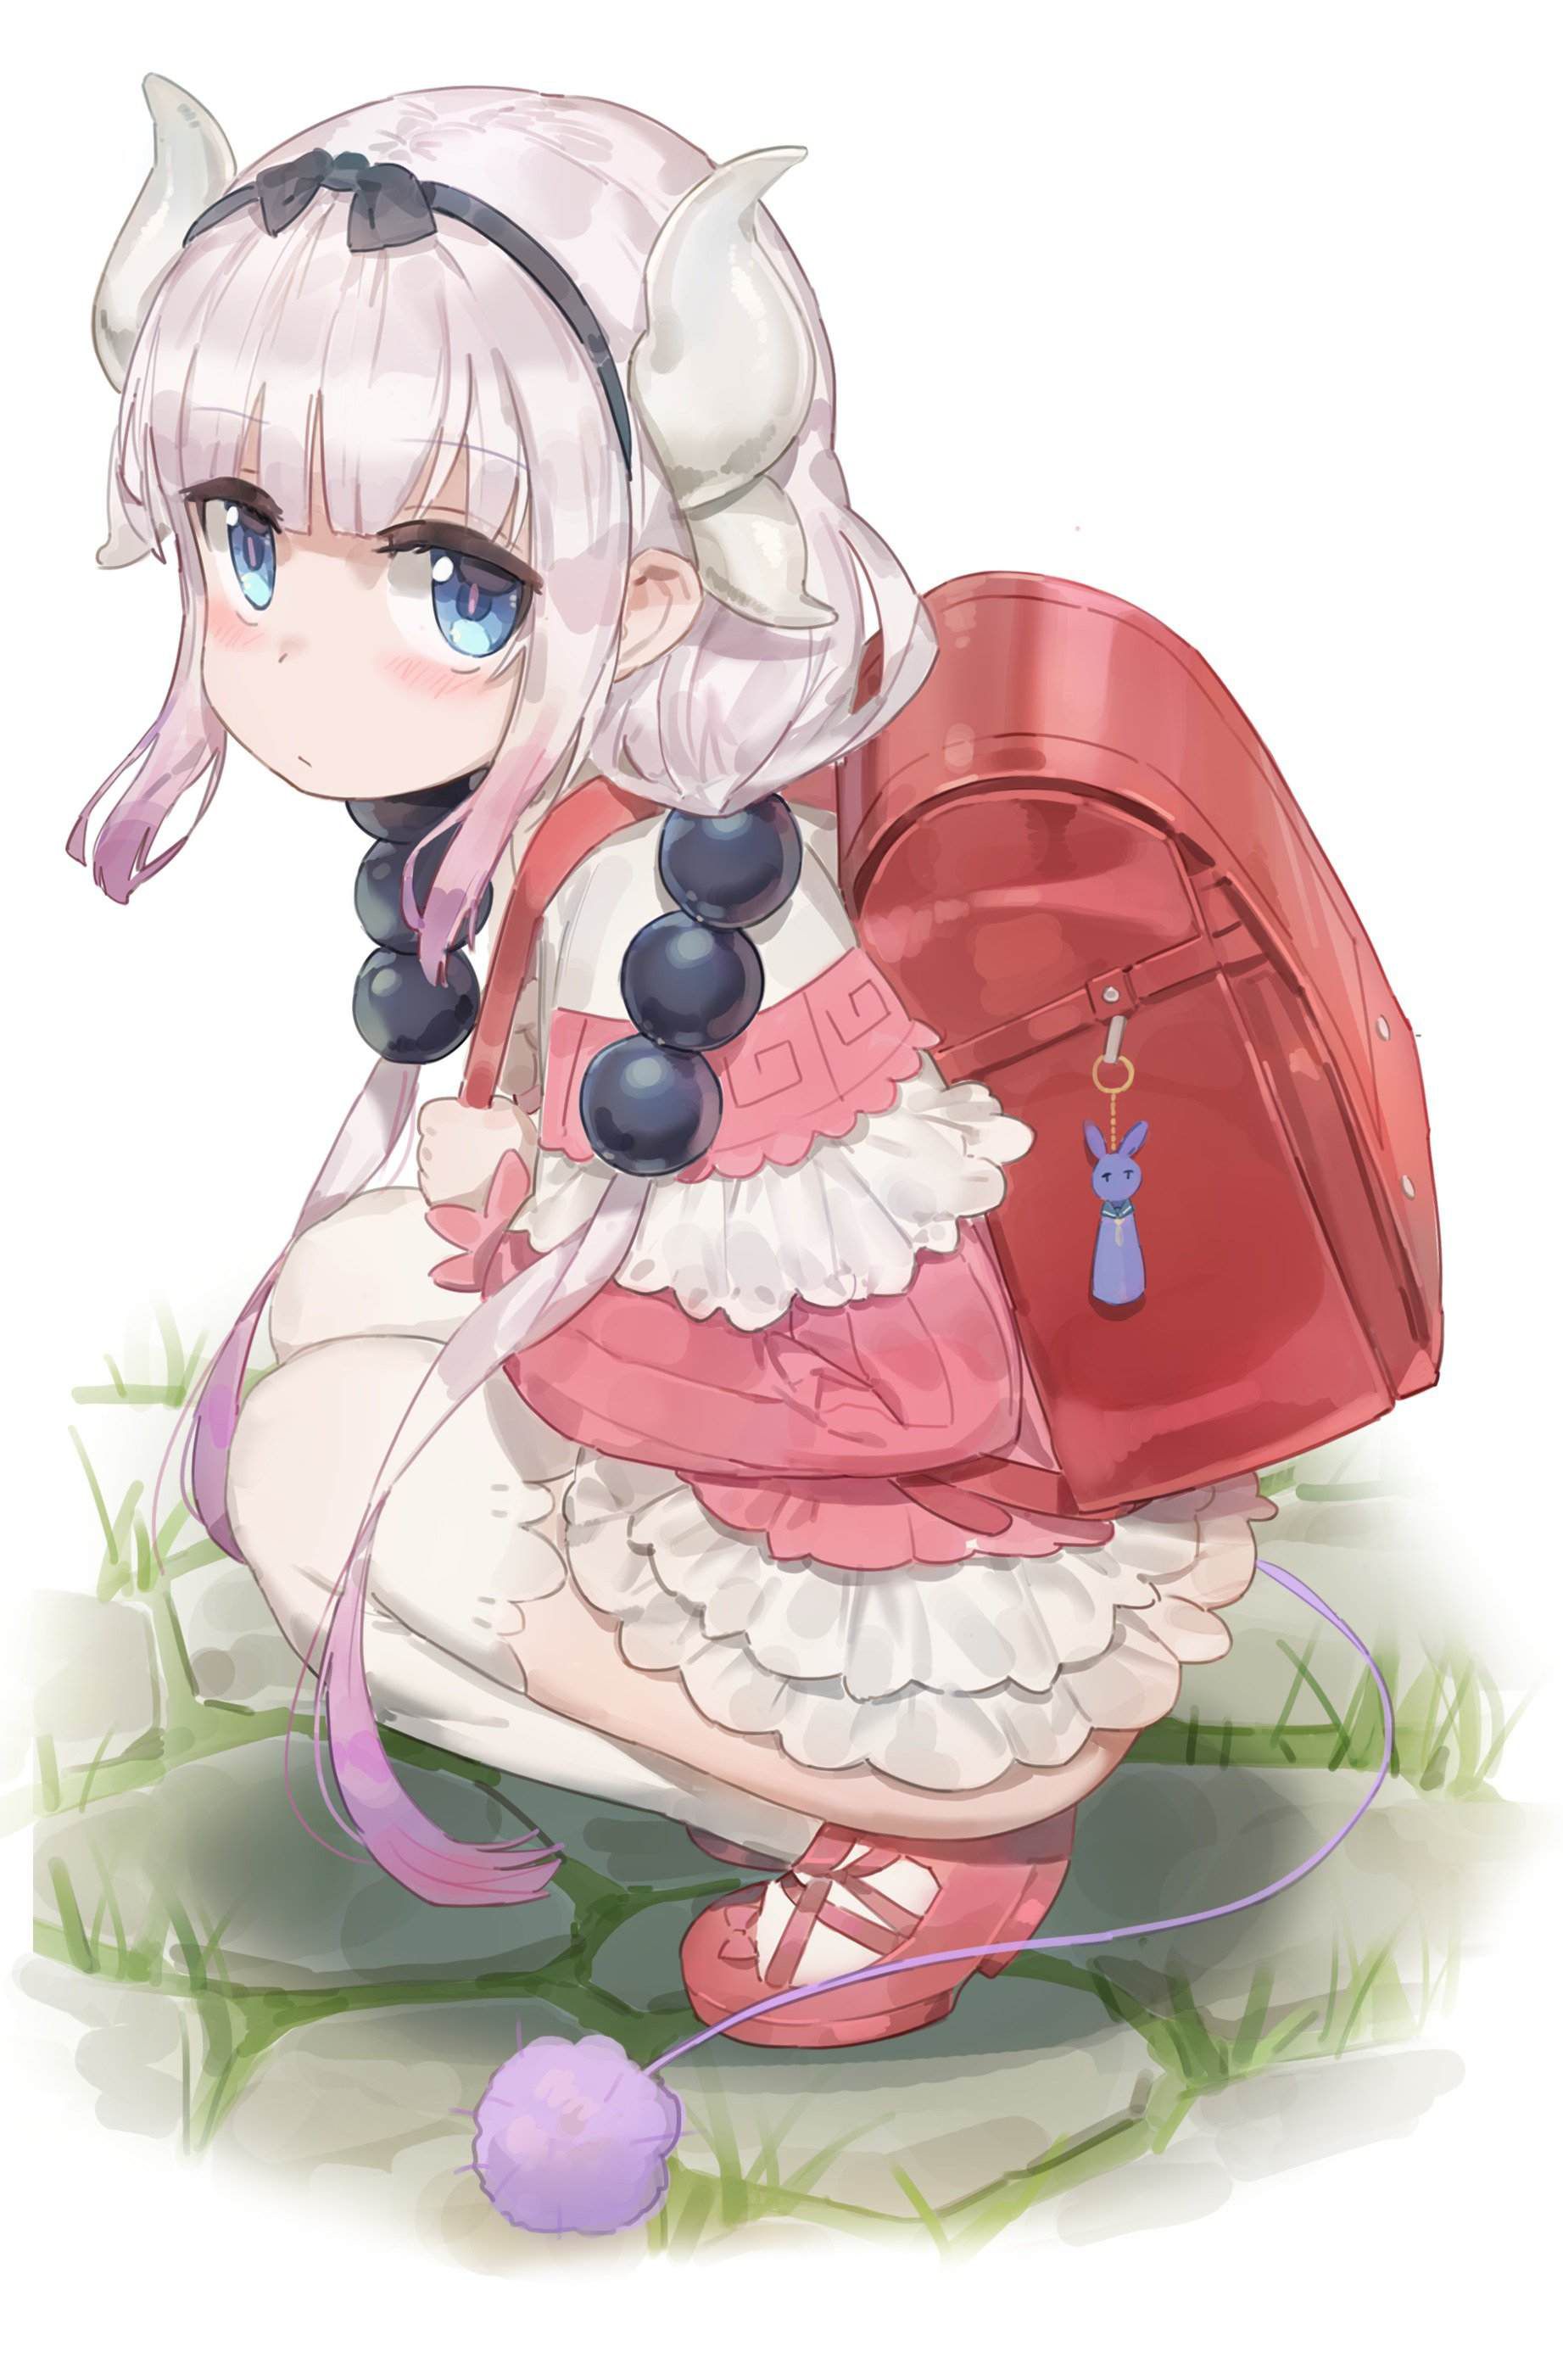 Cute second erotic image roundup of girls carrying satchel wwww Part 5 30